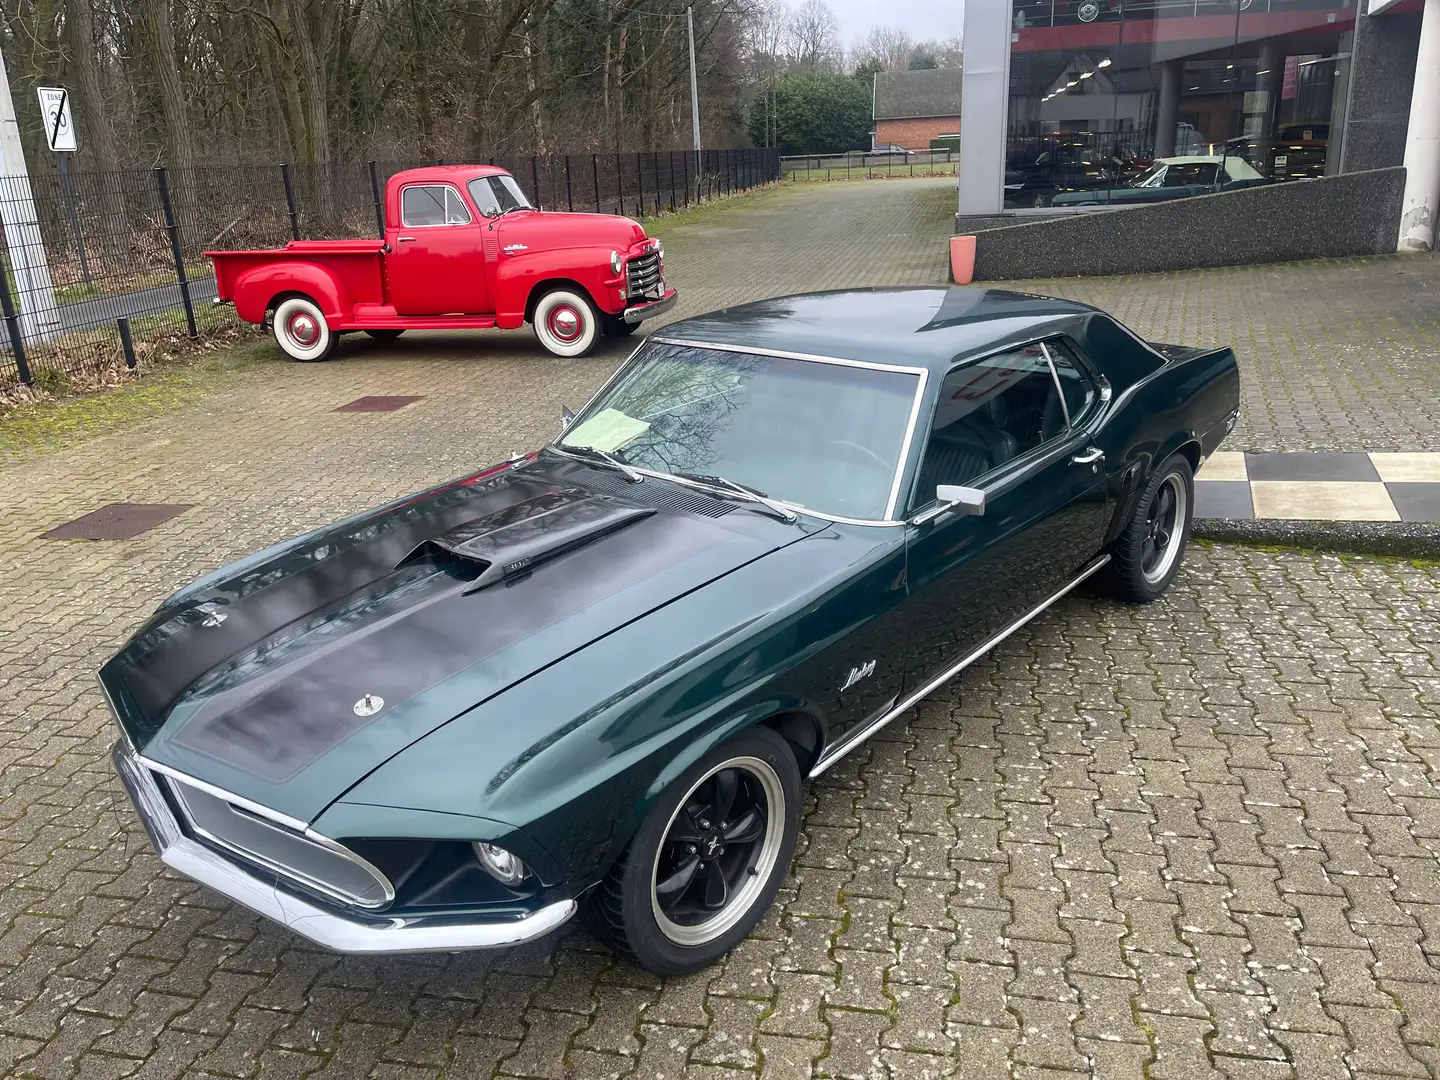 Ford Mustang Mustang Coupe 1969 "OPENHOUSE 25&26 May" Groen - 1